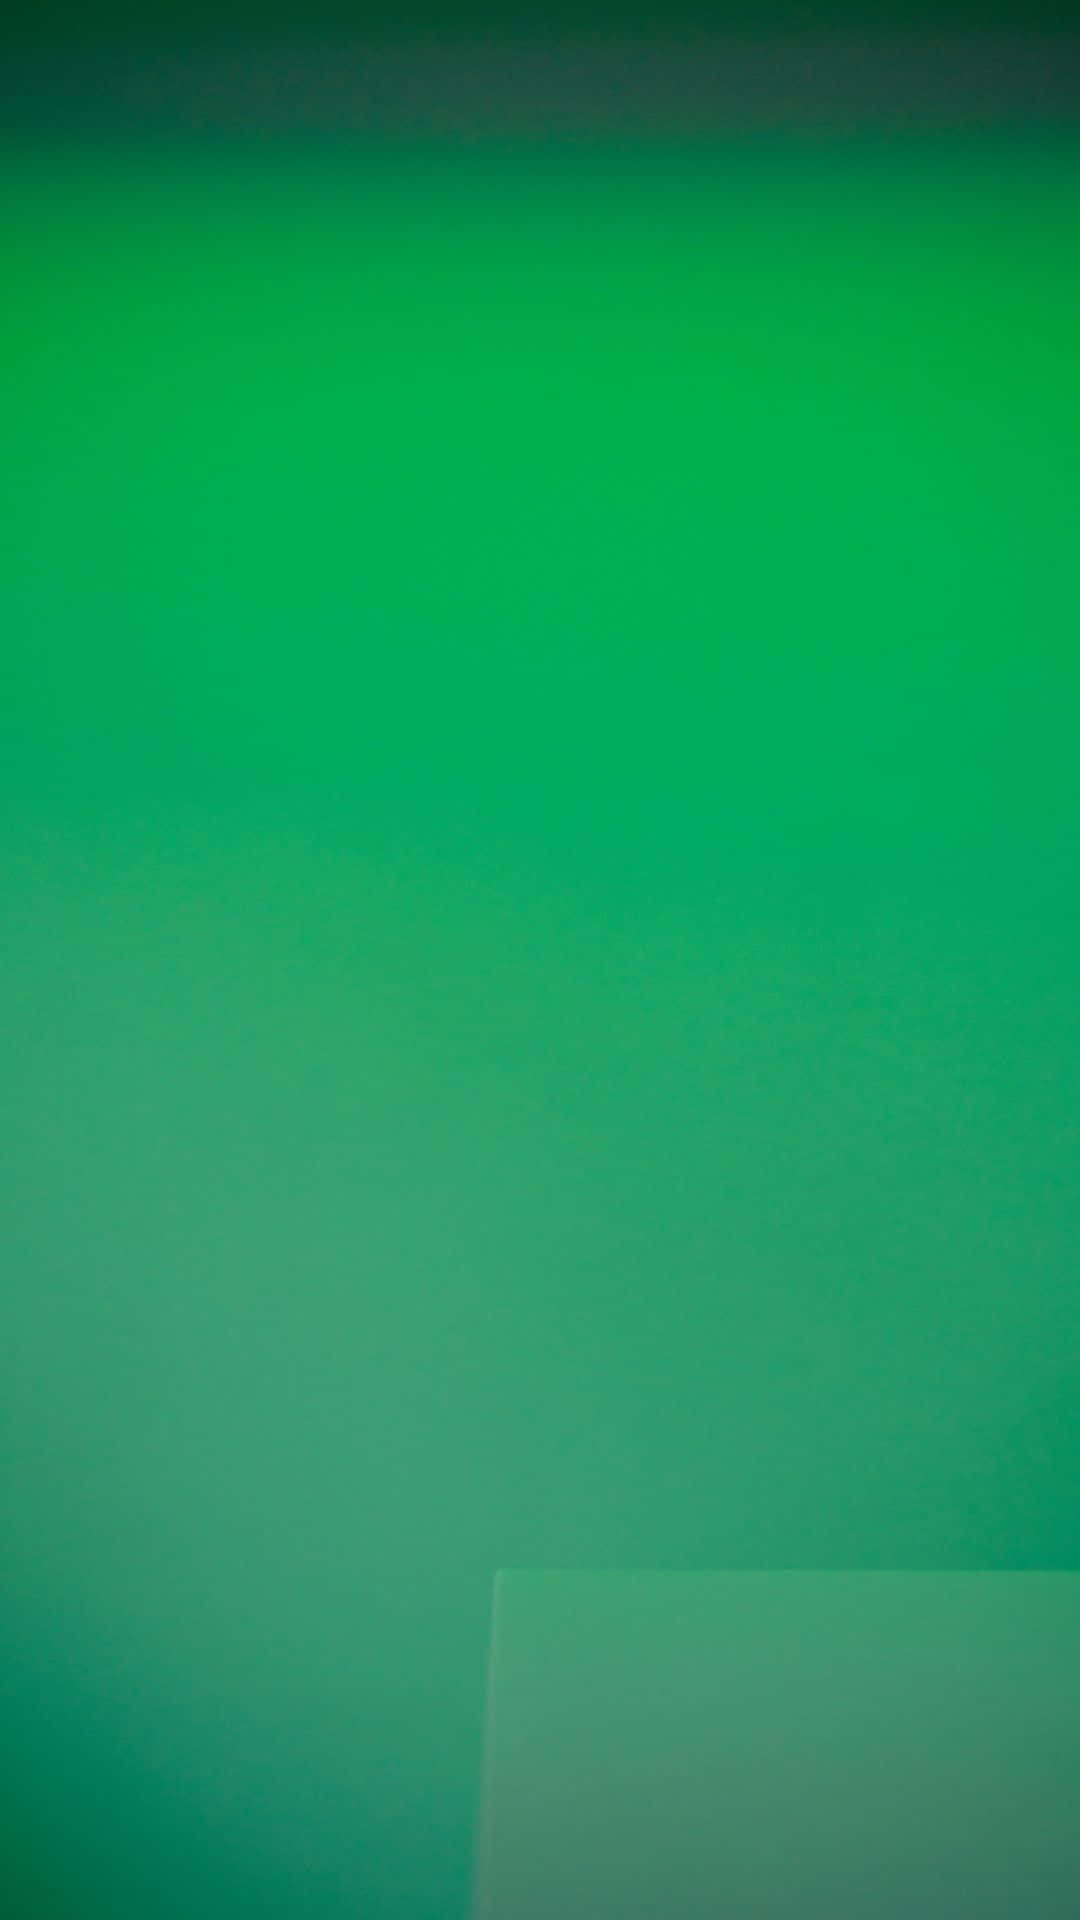 A rich and vibrant green gradient.